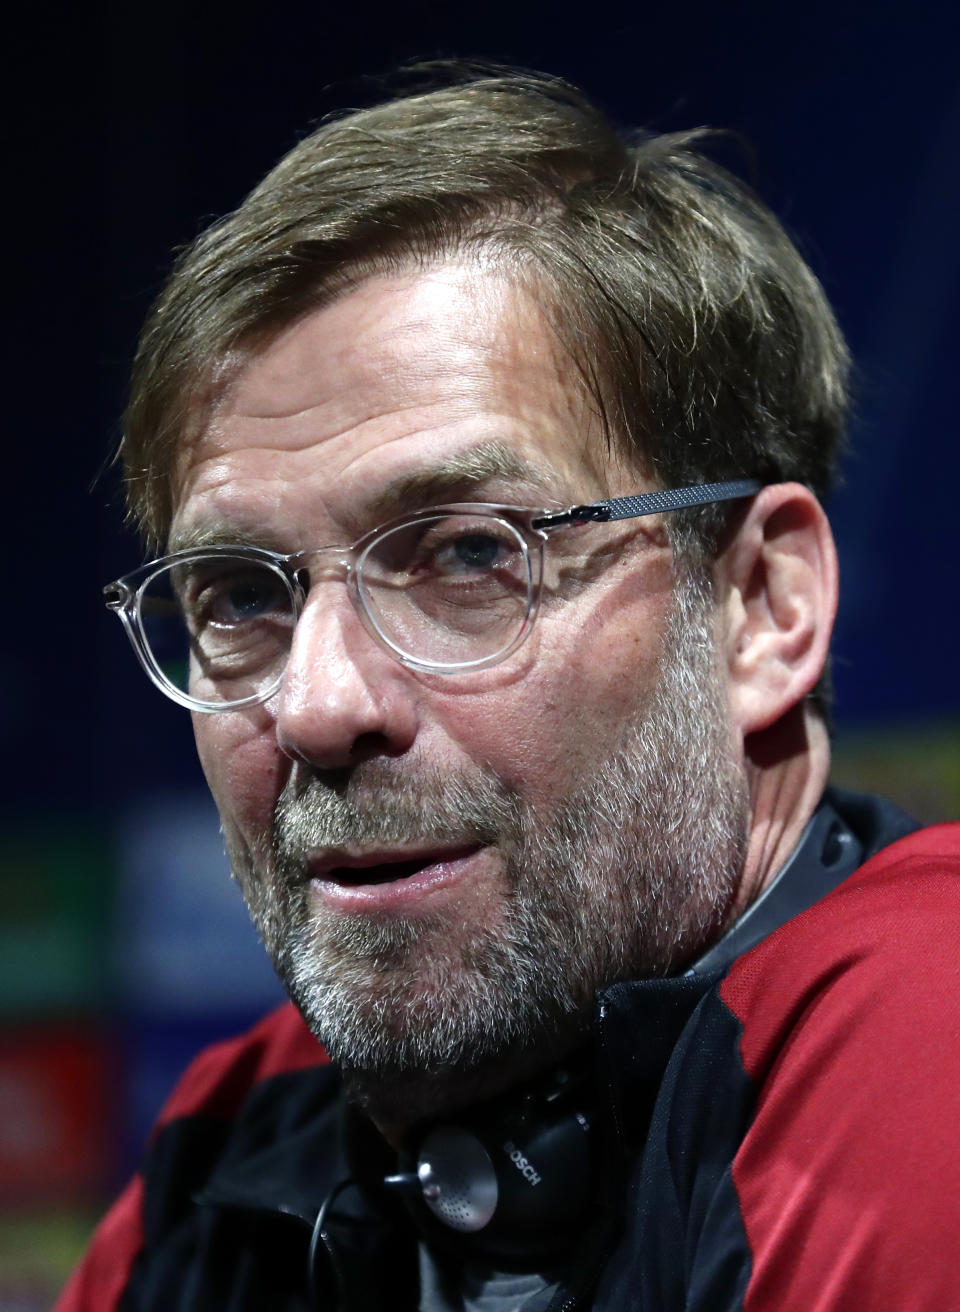 Liverpool manager Jurgen Klopp attends a press conference at the Camp Nou stadium in Barcelona, Spain, Tuesday, April 30, 2019. FC Barcelona will play against Liverpool in a first leg semifinal Champions League soccer match on Wednesday, May 1. (AP Photo/Manu Fernandez)